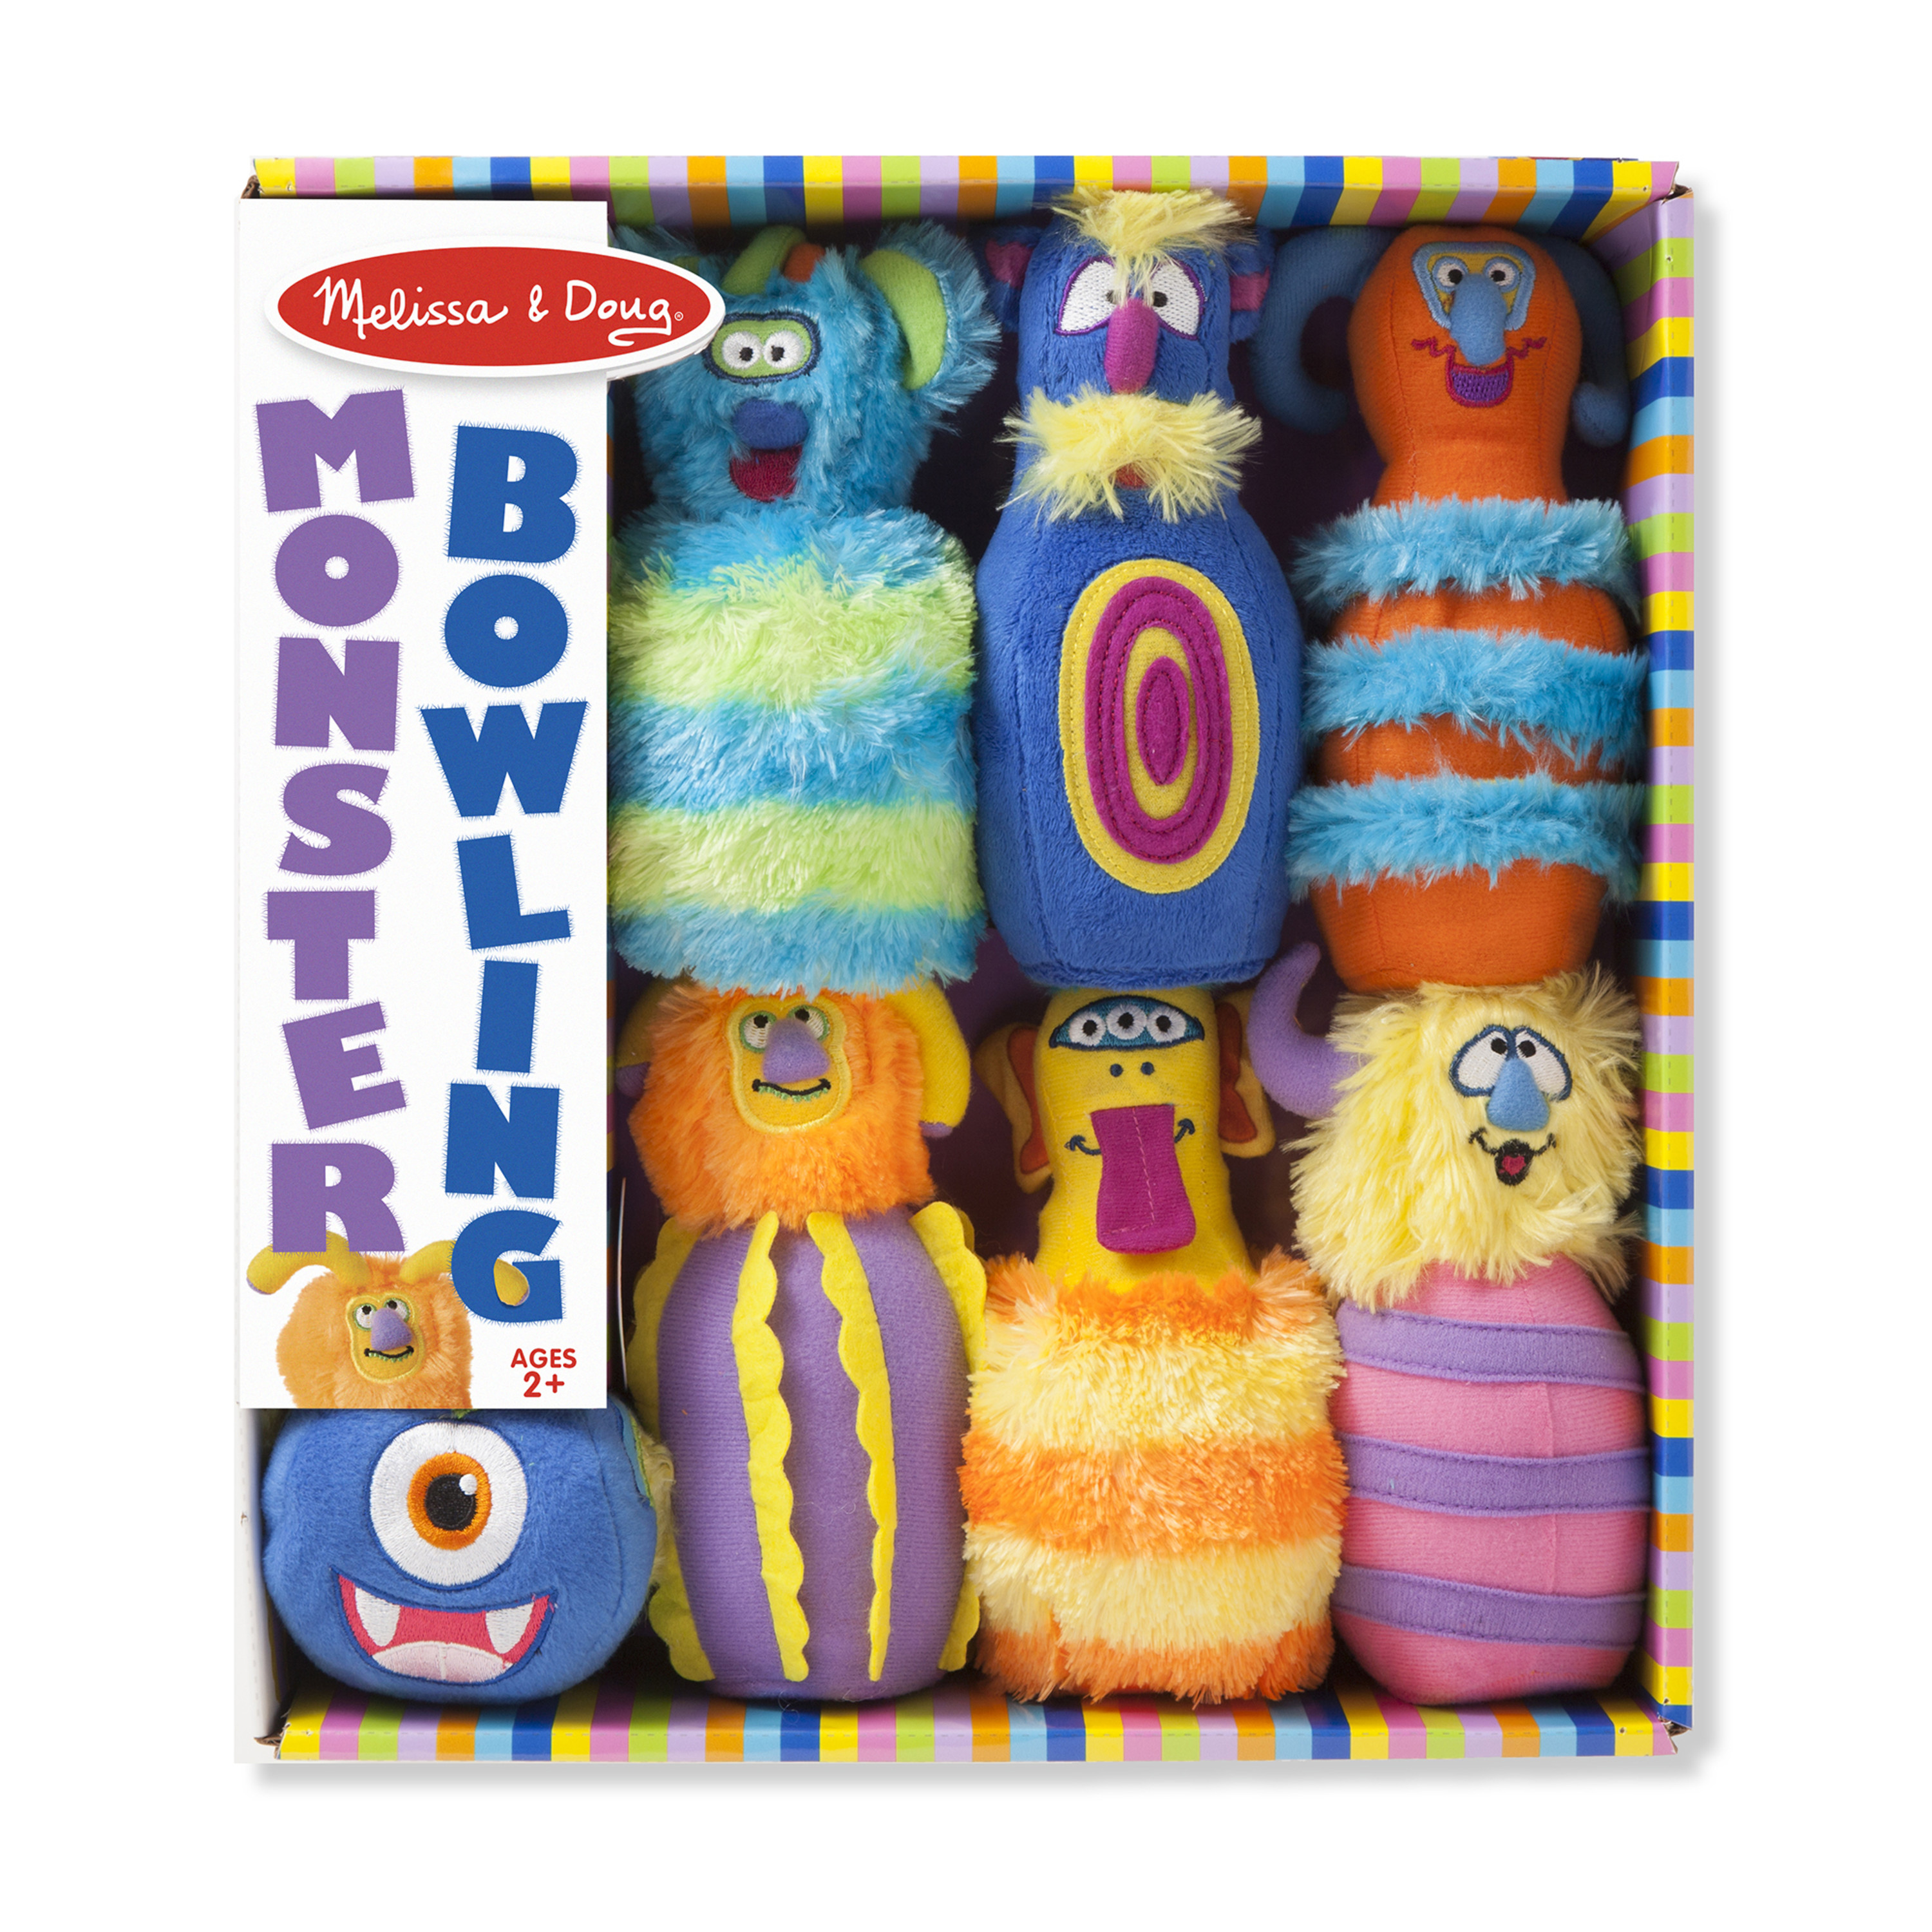 Melissa & Doug Fuzzy Monster Bowling Pins & Ball With Mesh Storage Bag (8-Piece Set) - image 3 of 9